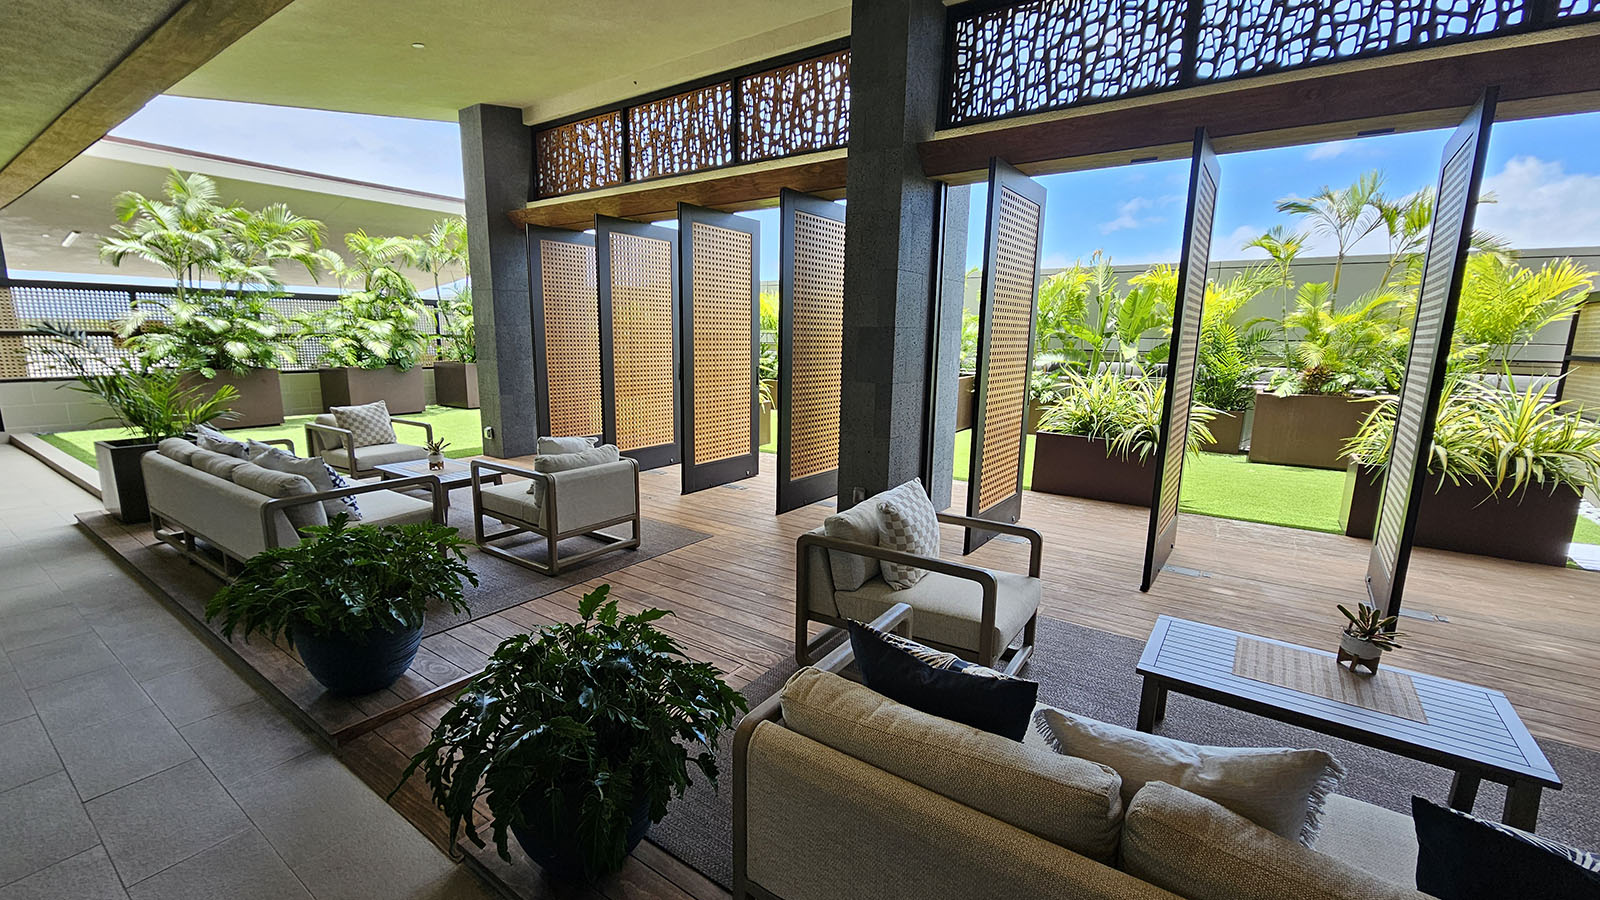 Get some sun in Hawaiian Airlines' private lounge